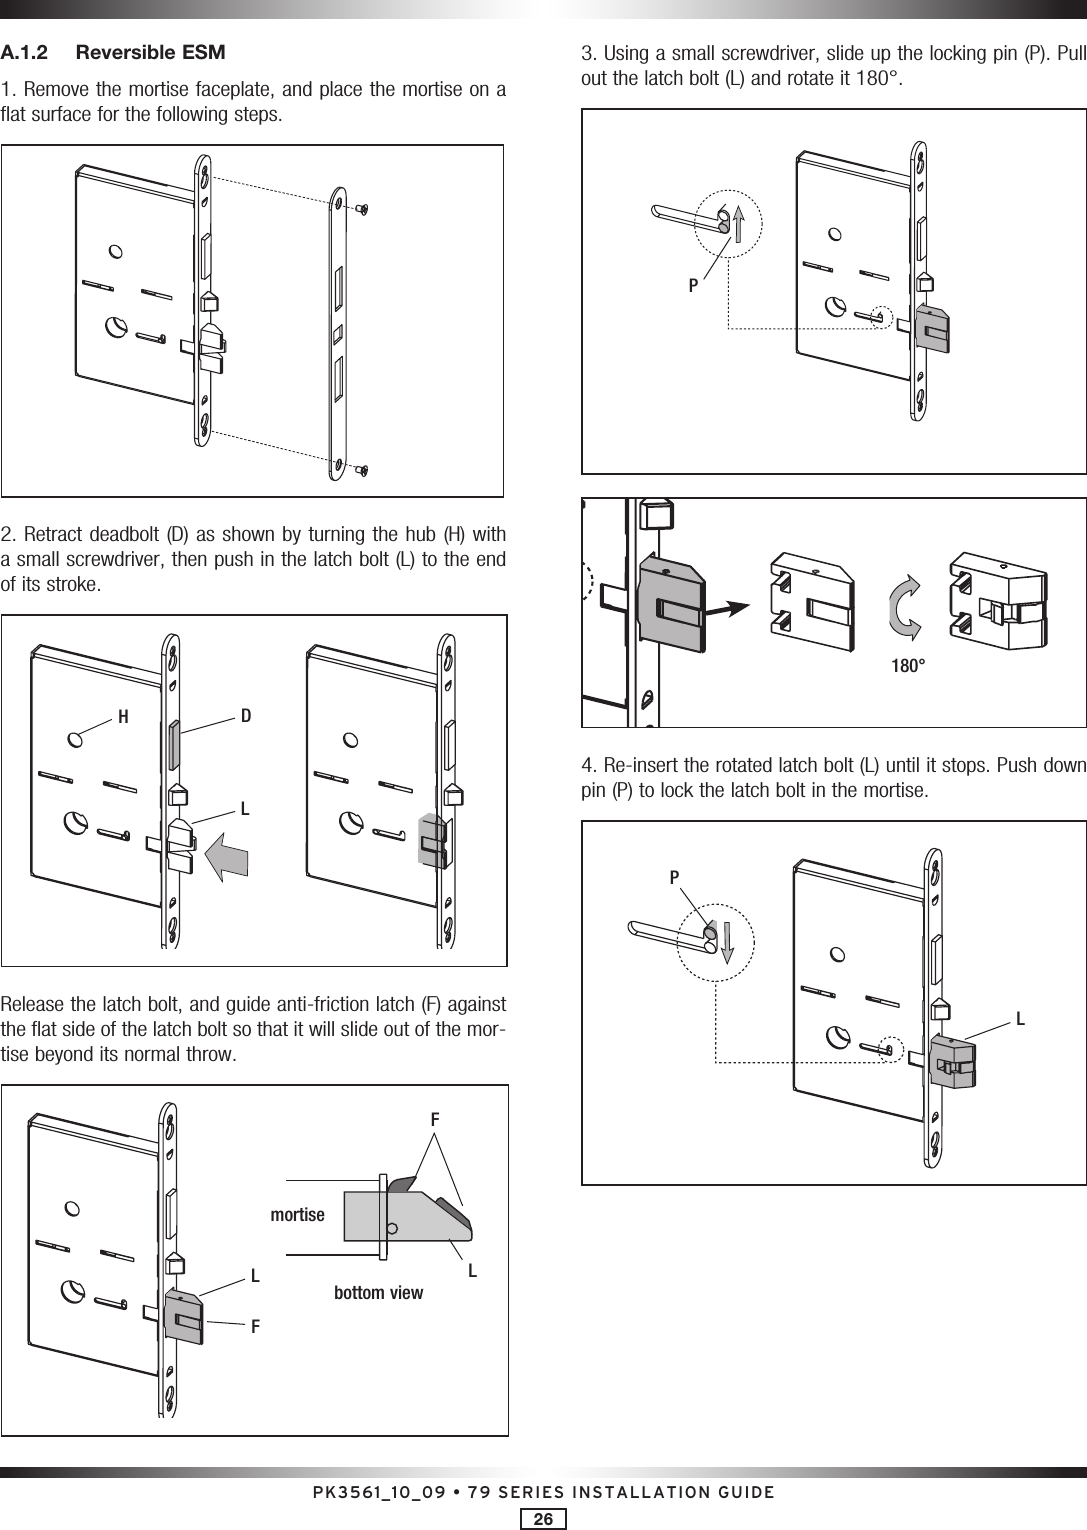 PK3561_10_09 • 79 SERIES INSTALLATION GUIDE26A.1.2  Reversible ESM1. Remove the mortise faceplate, and place the mortise on a flat surface for the following steps.2. Retract deadbolt (D) as shown by turning the hub (H) with a small screwdriver, then push in the latch bolt (L) to the end of its stroke.DHLRelease the latch bolt, and guide anti-friction latch (F) against the flat side of the latch bolt so that it will slide out of the mor-tise beyond its normal throw.Fmortisebottom viewLFL3. Using a small screwdriver, slide up the locking pin (P). Pull out the latch bolt (L) and rotate it 180°.P180°4. Re-insert the rotated latch bolt (L) until it stops. Push down pin (P) to lock the latch bolt in the mortise.LP